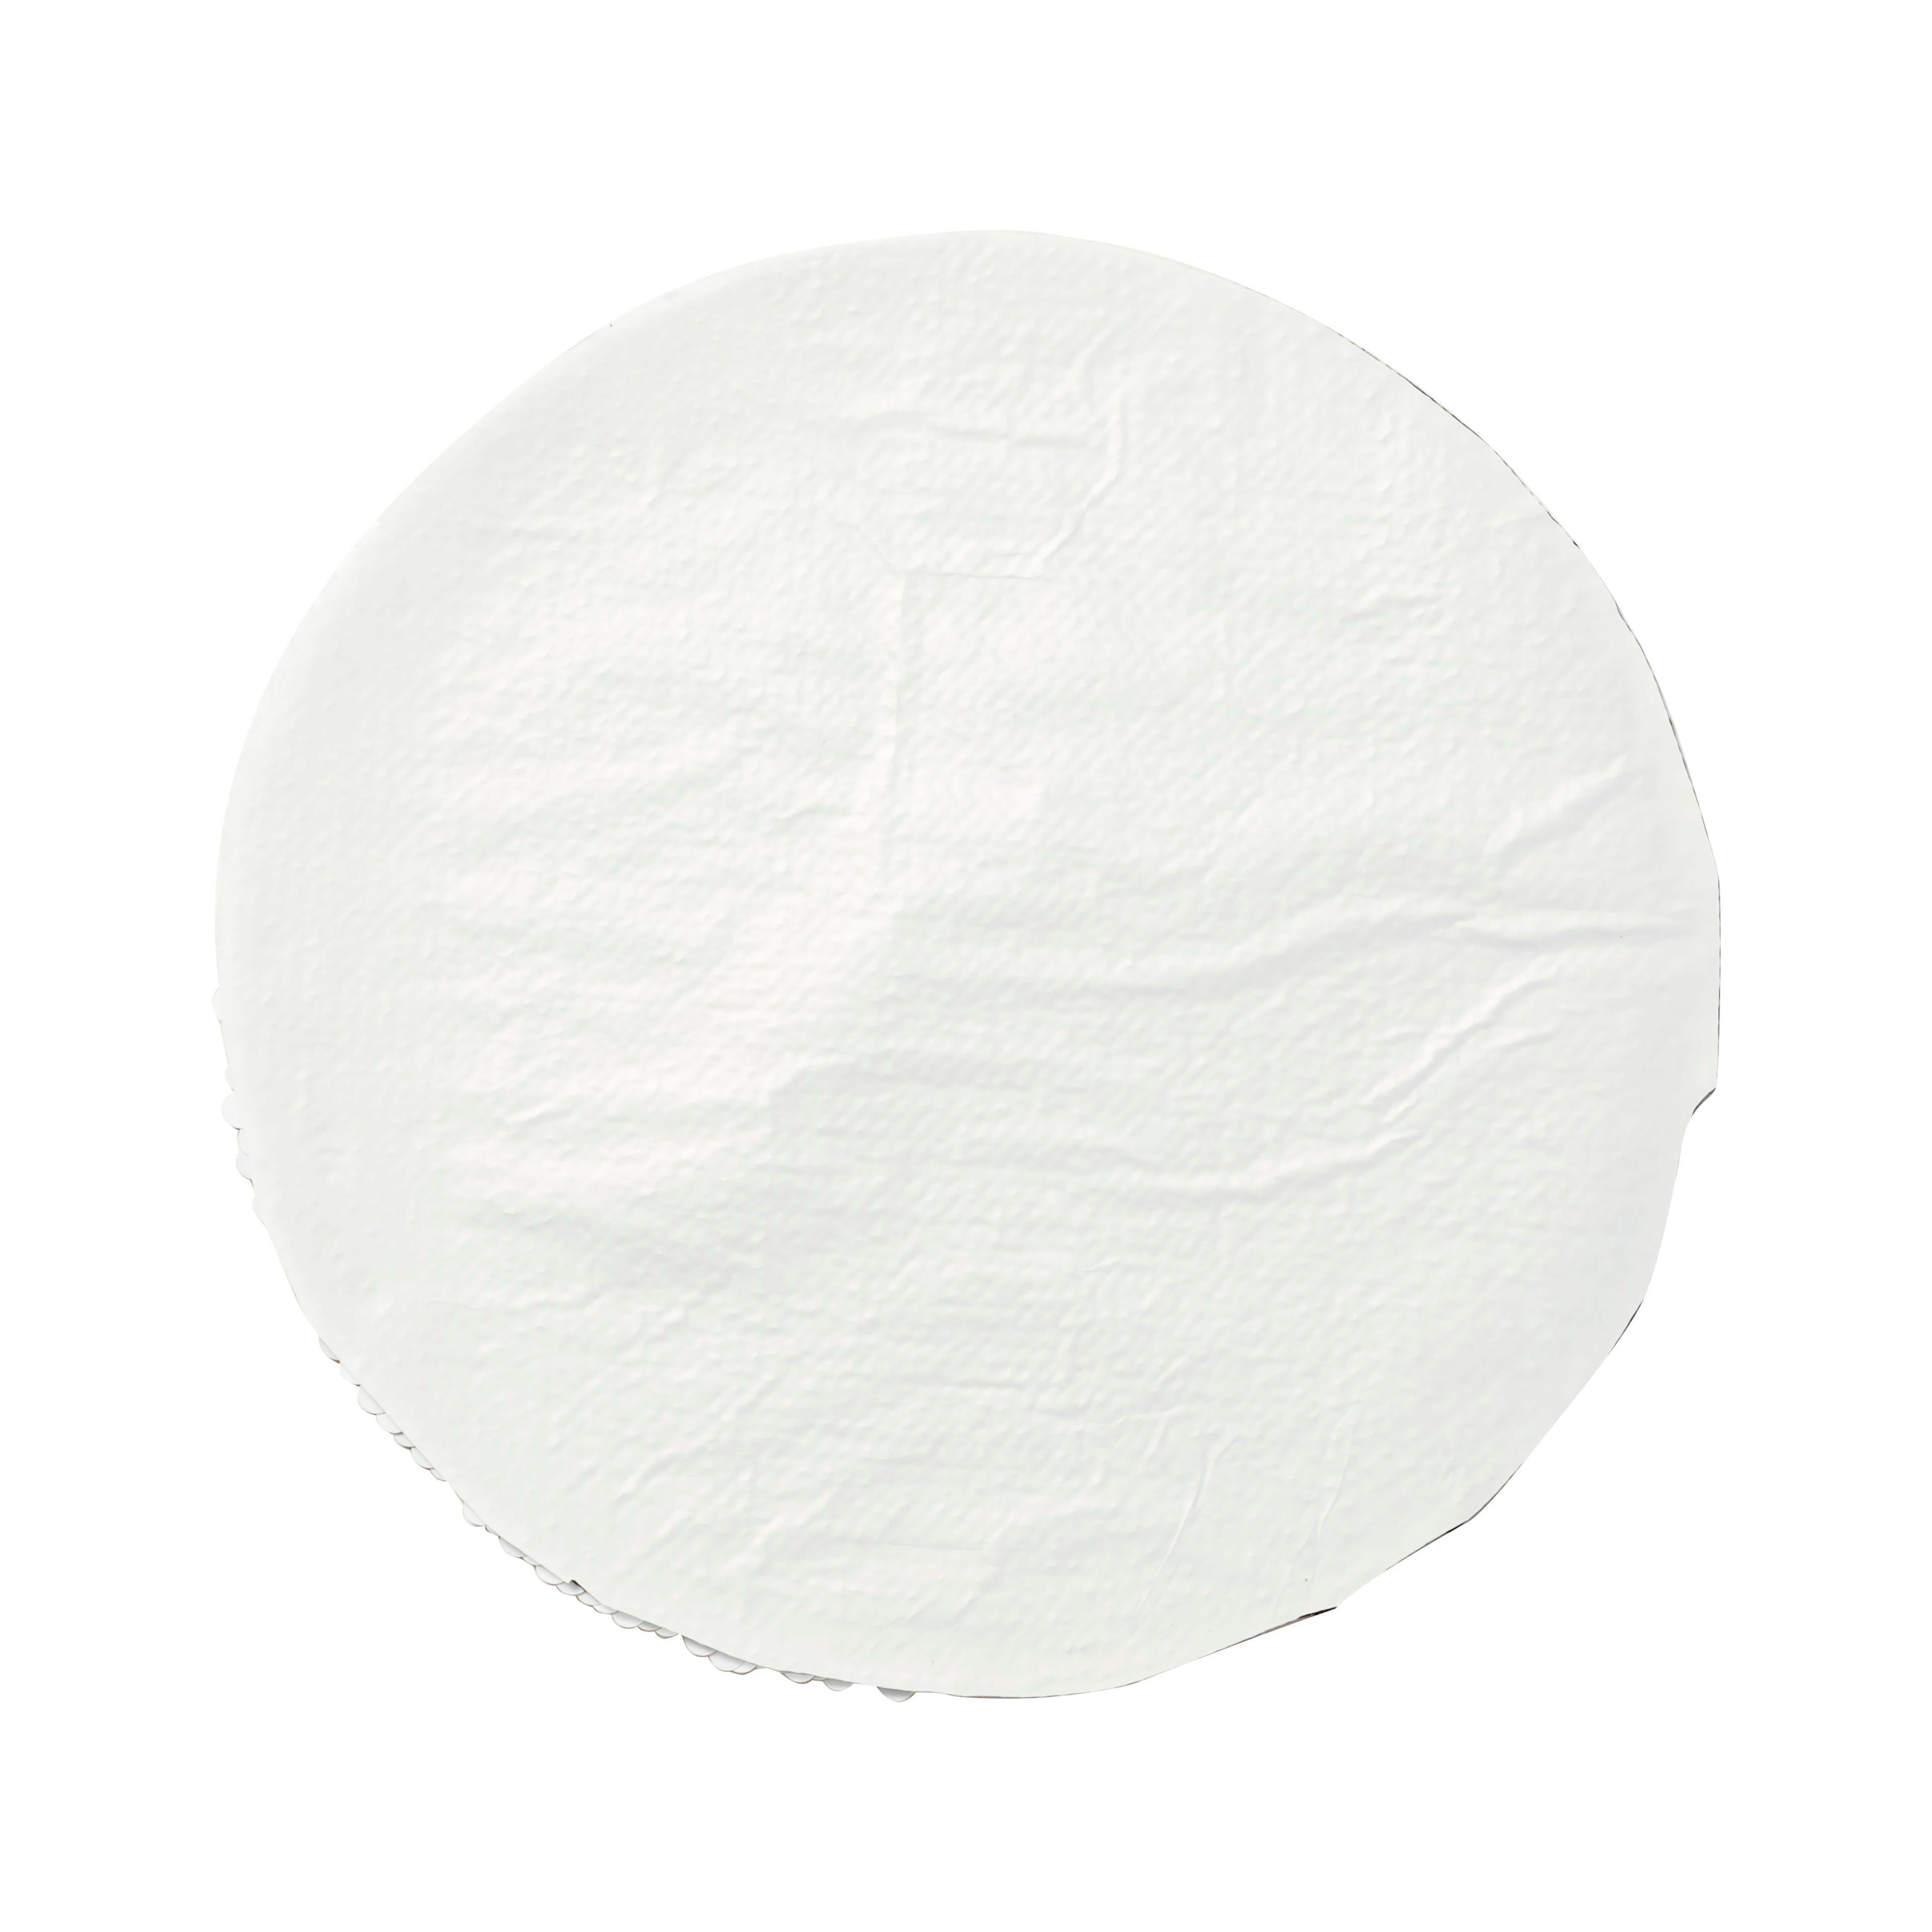 7" Round Sequin Sublimation Patches - 2 Pack.